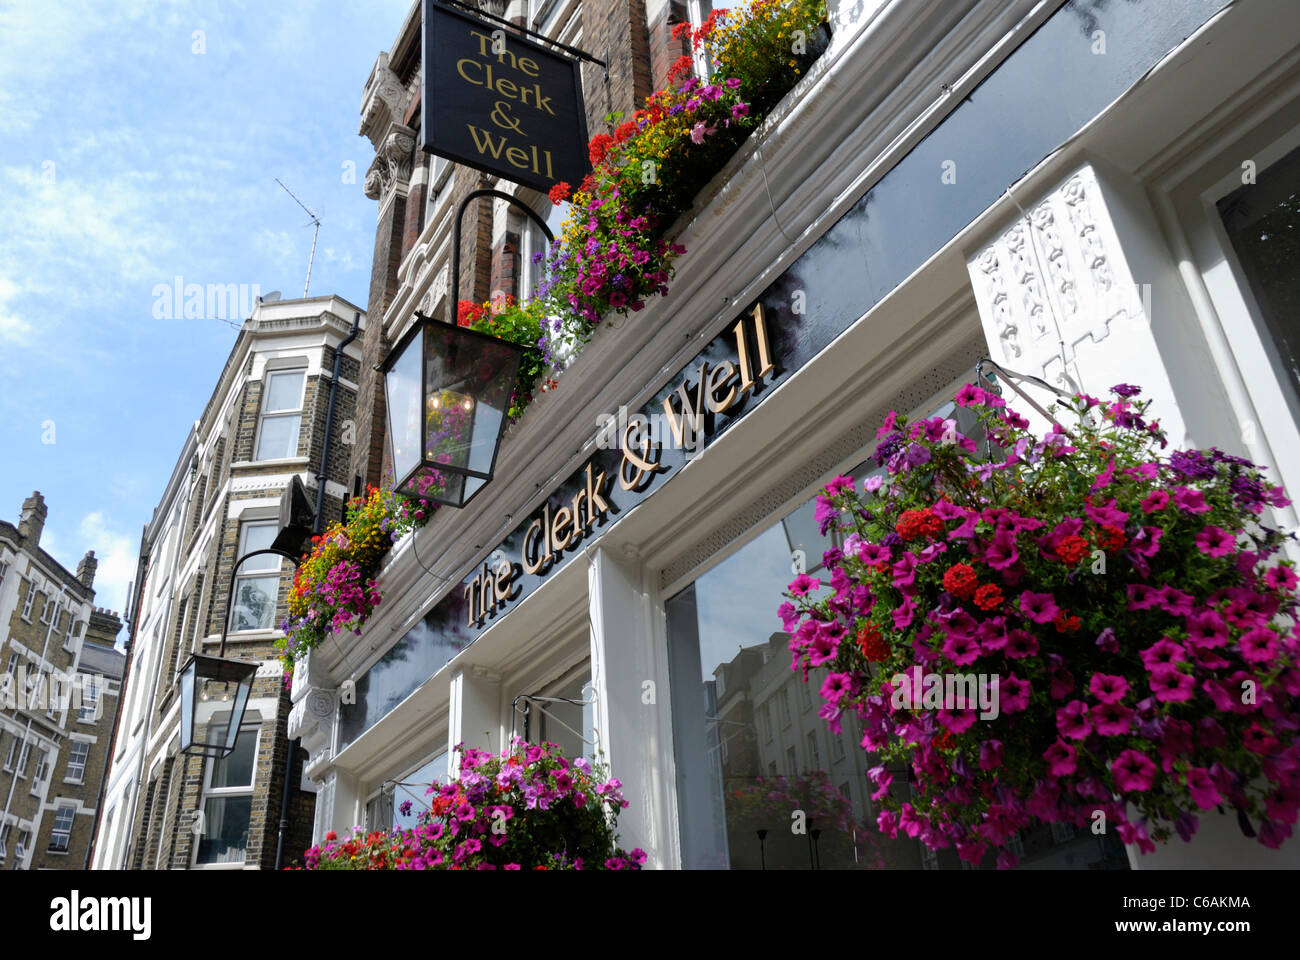 The Clerk and Well public house in Clerkenwell Road, London, England Stock Photo